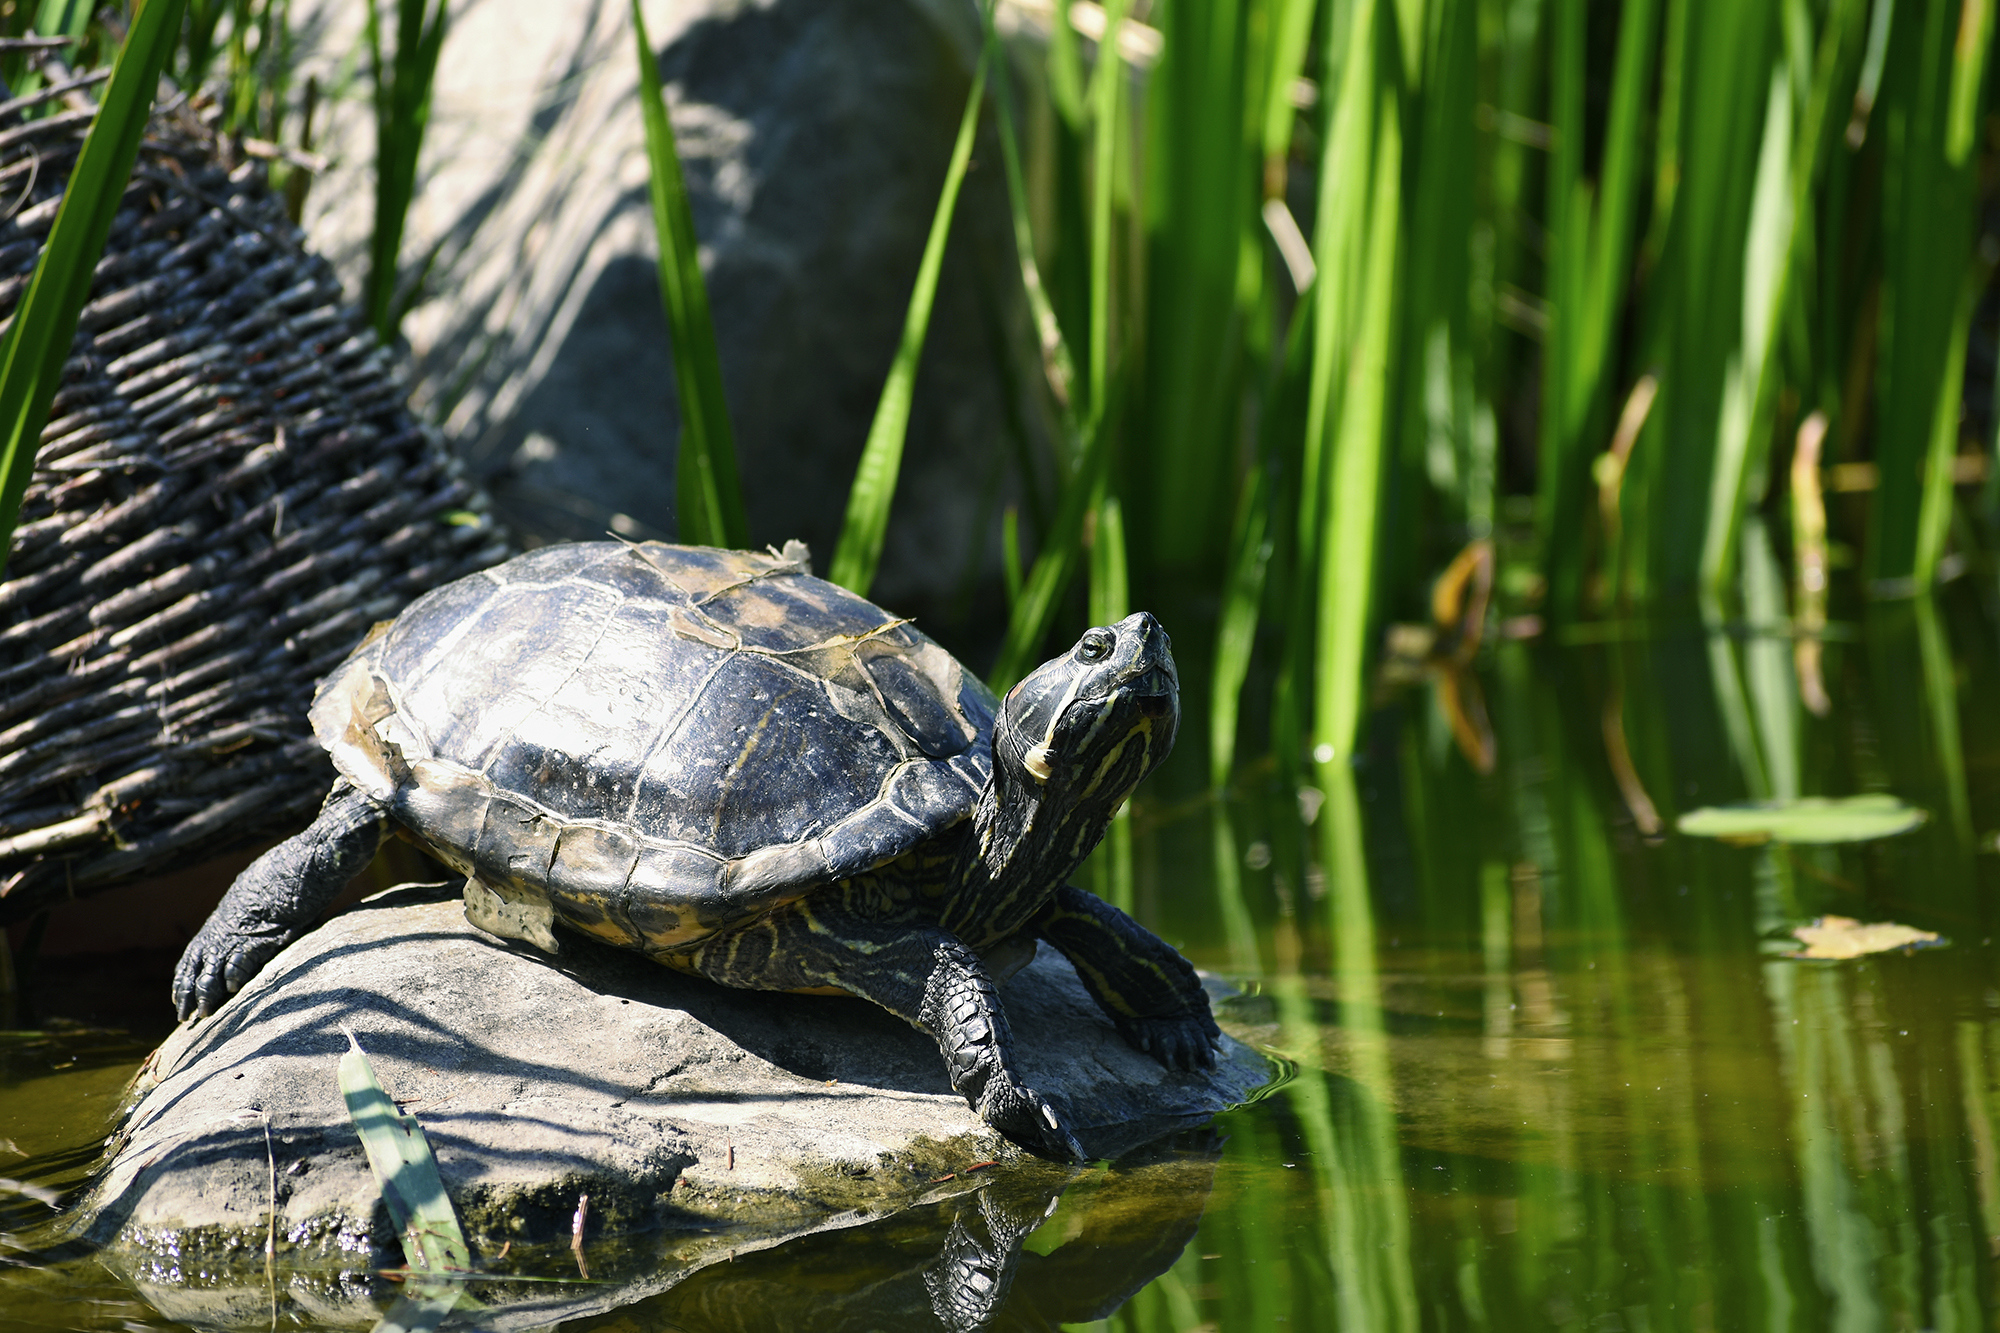 A beautiful turtle on a stone wild in nature by the pond. (Trachemys scripta elegans)